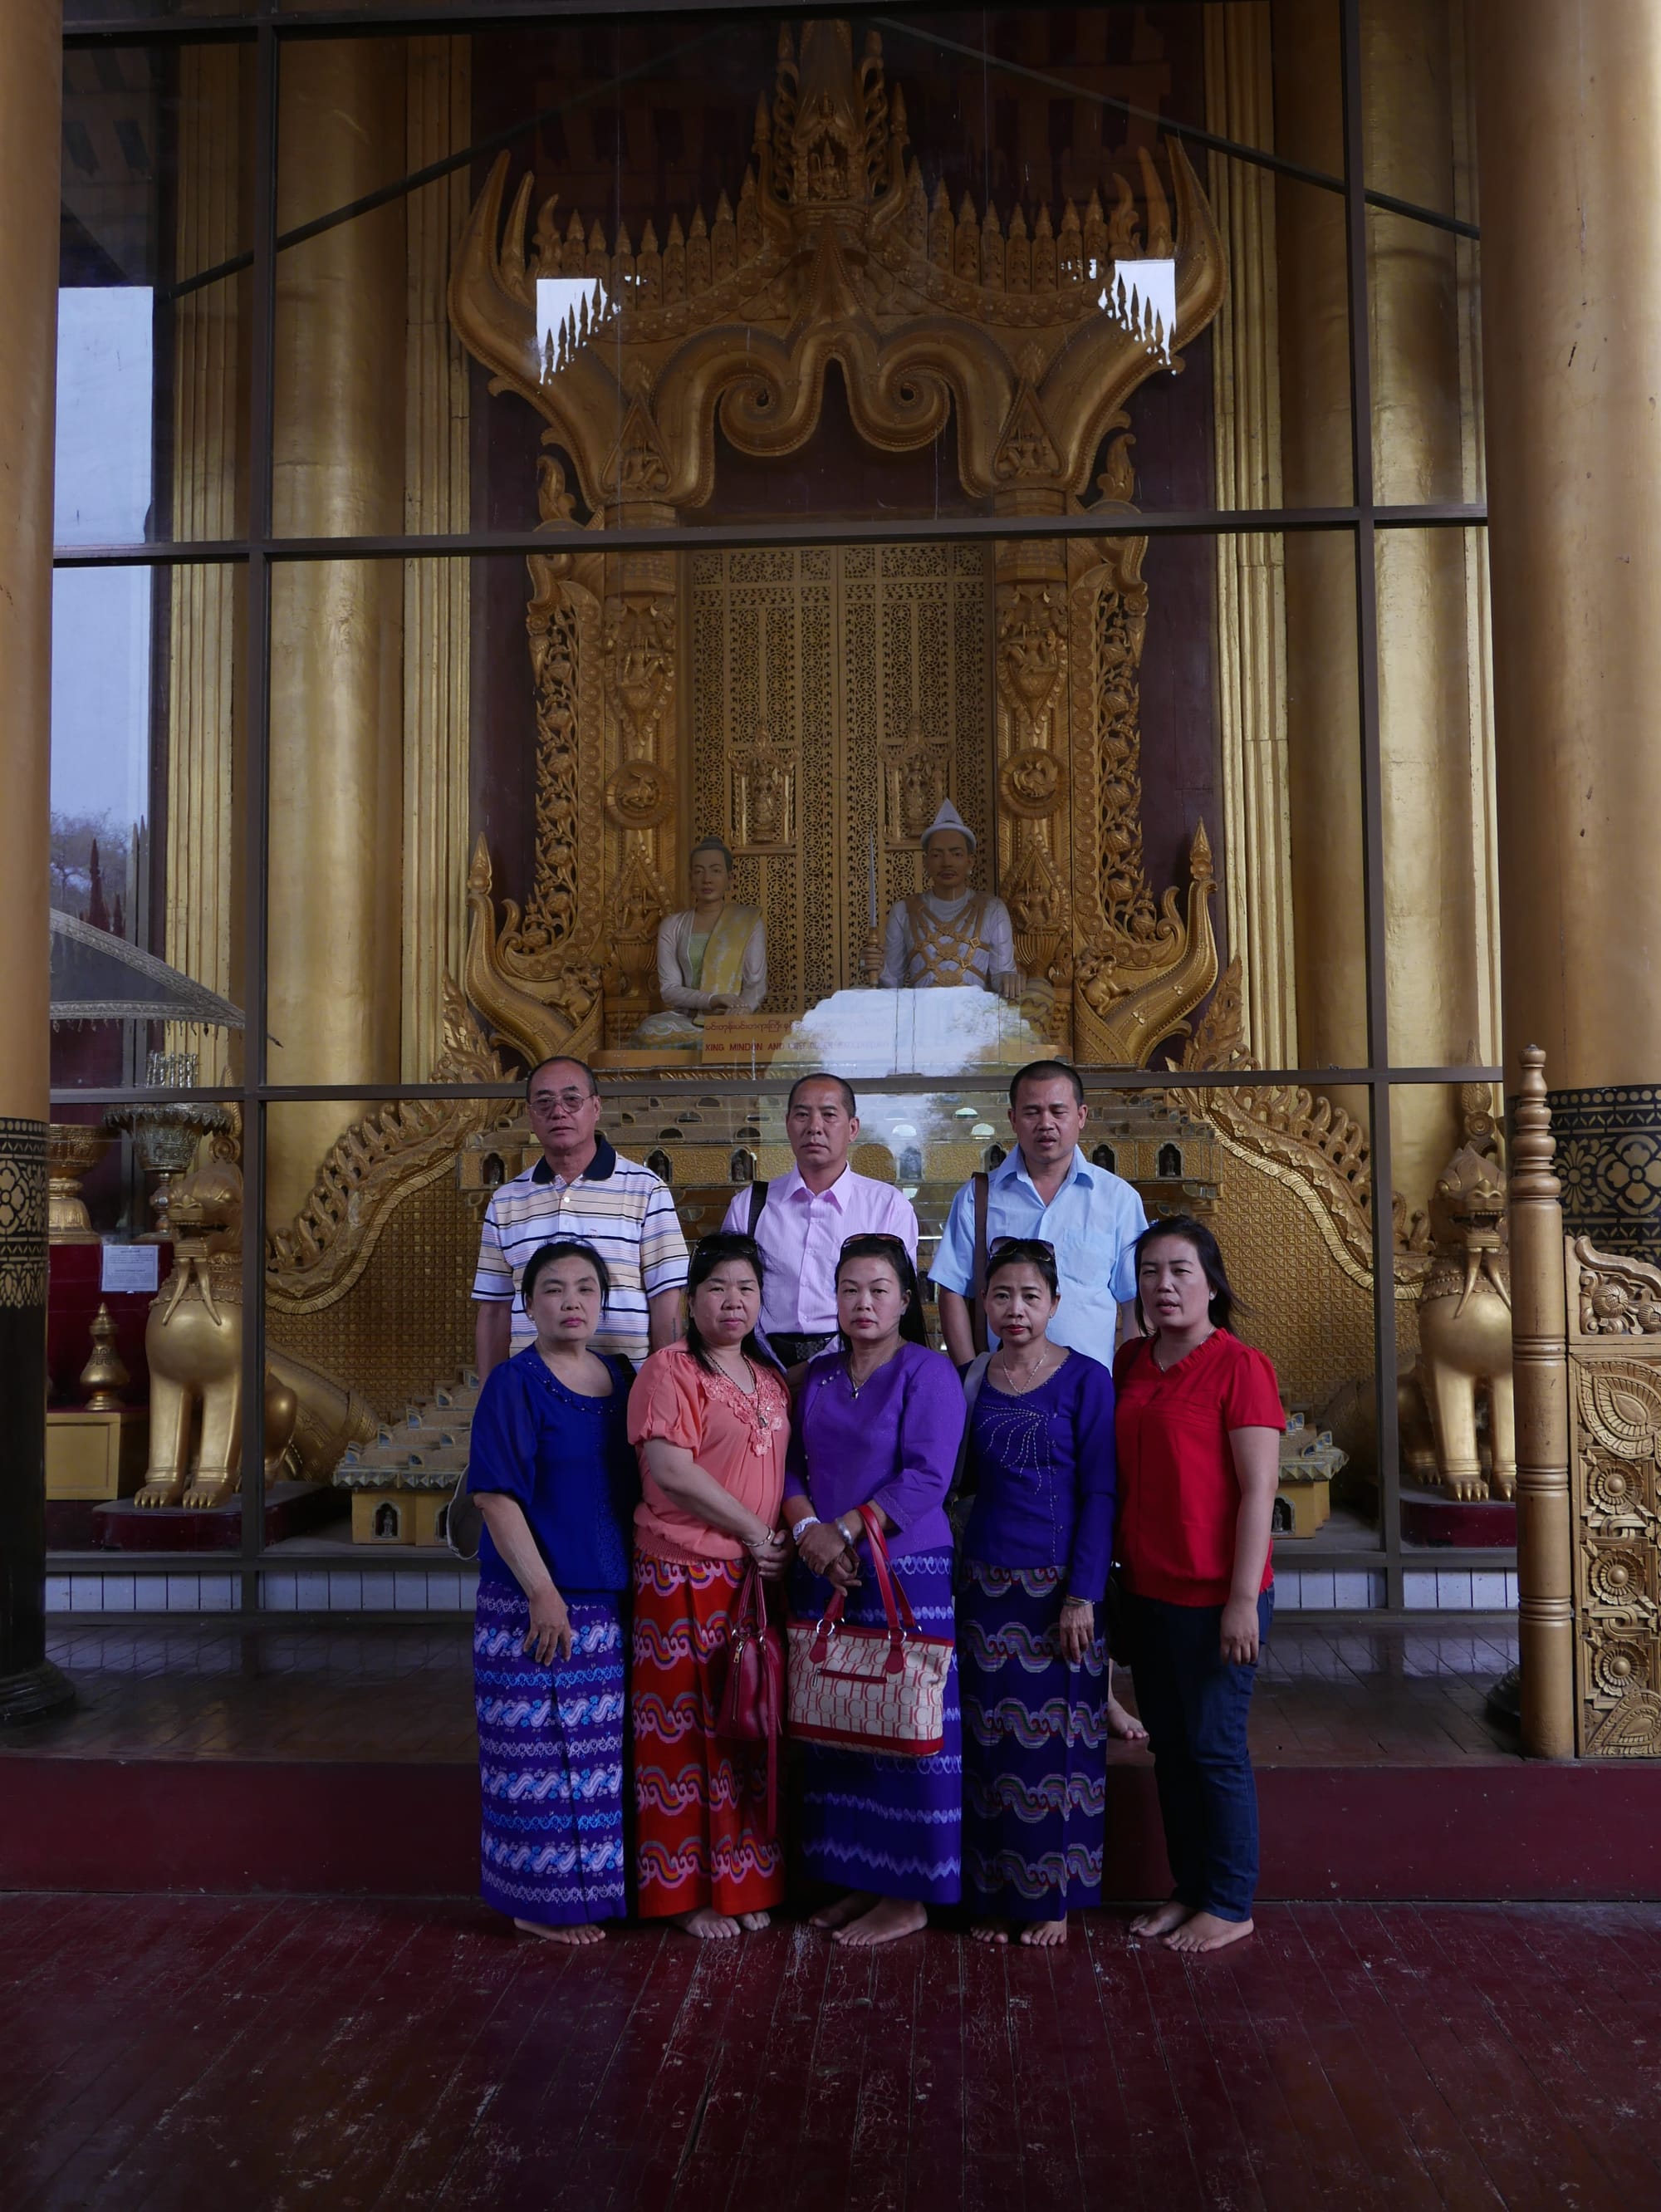 Photo by Author — visitors to the palace